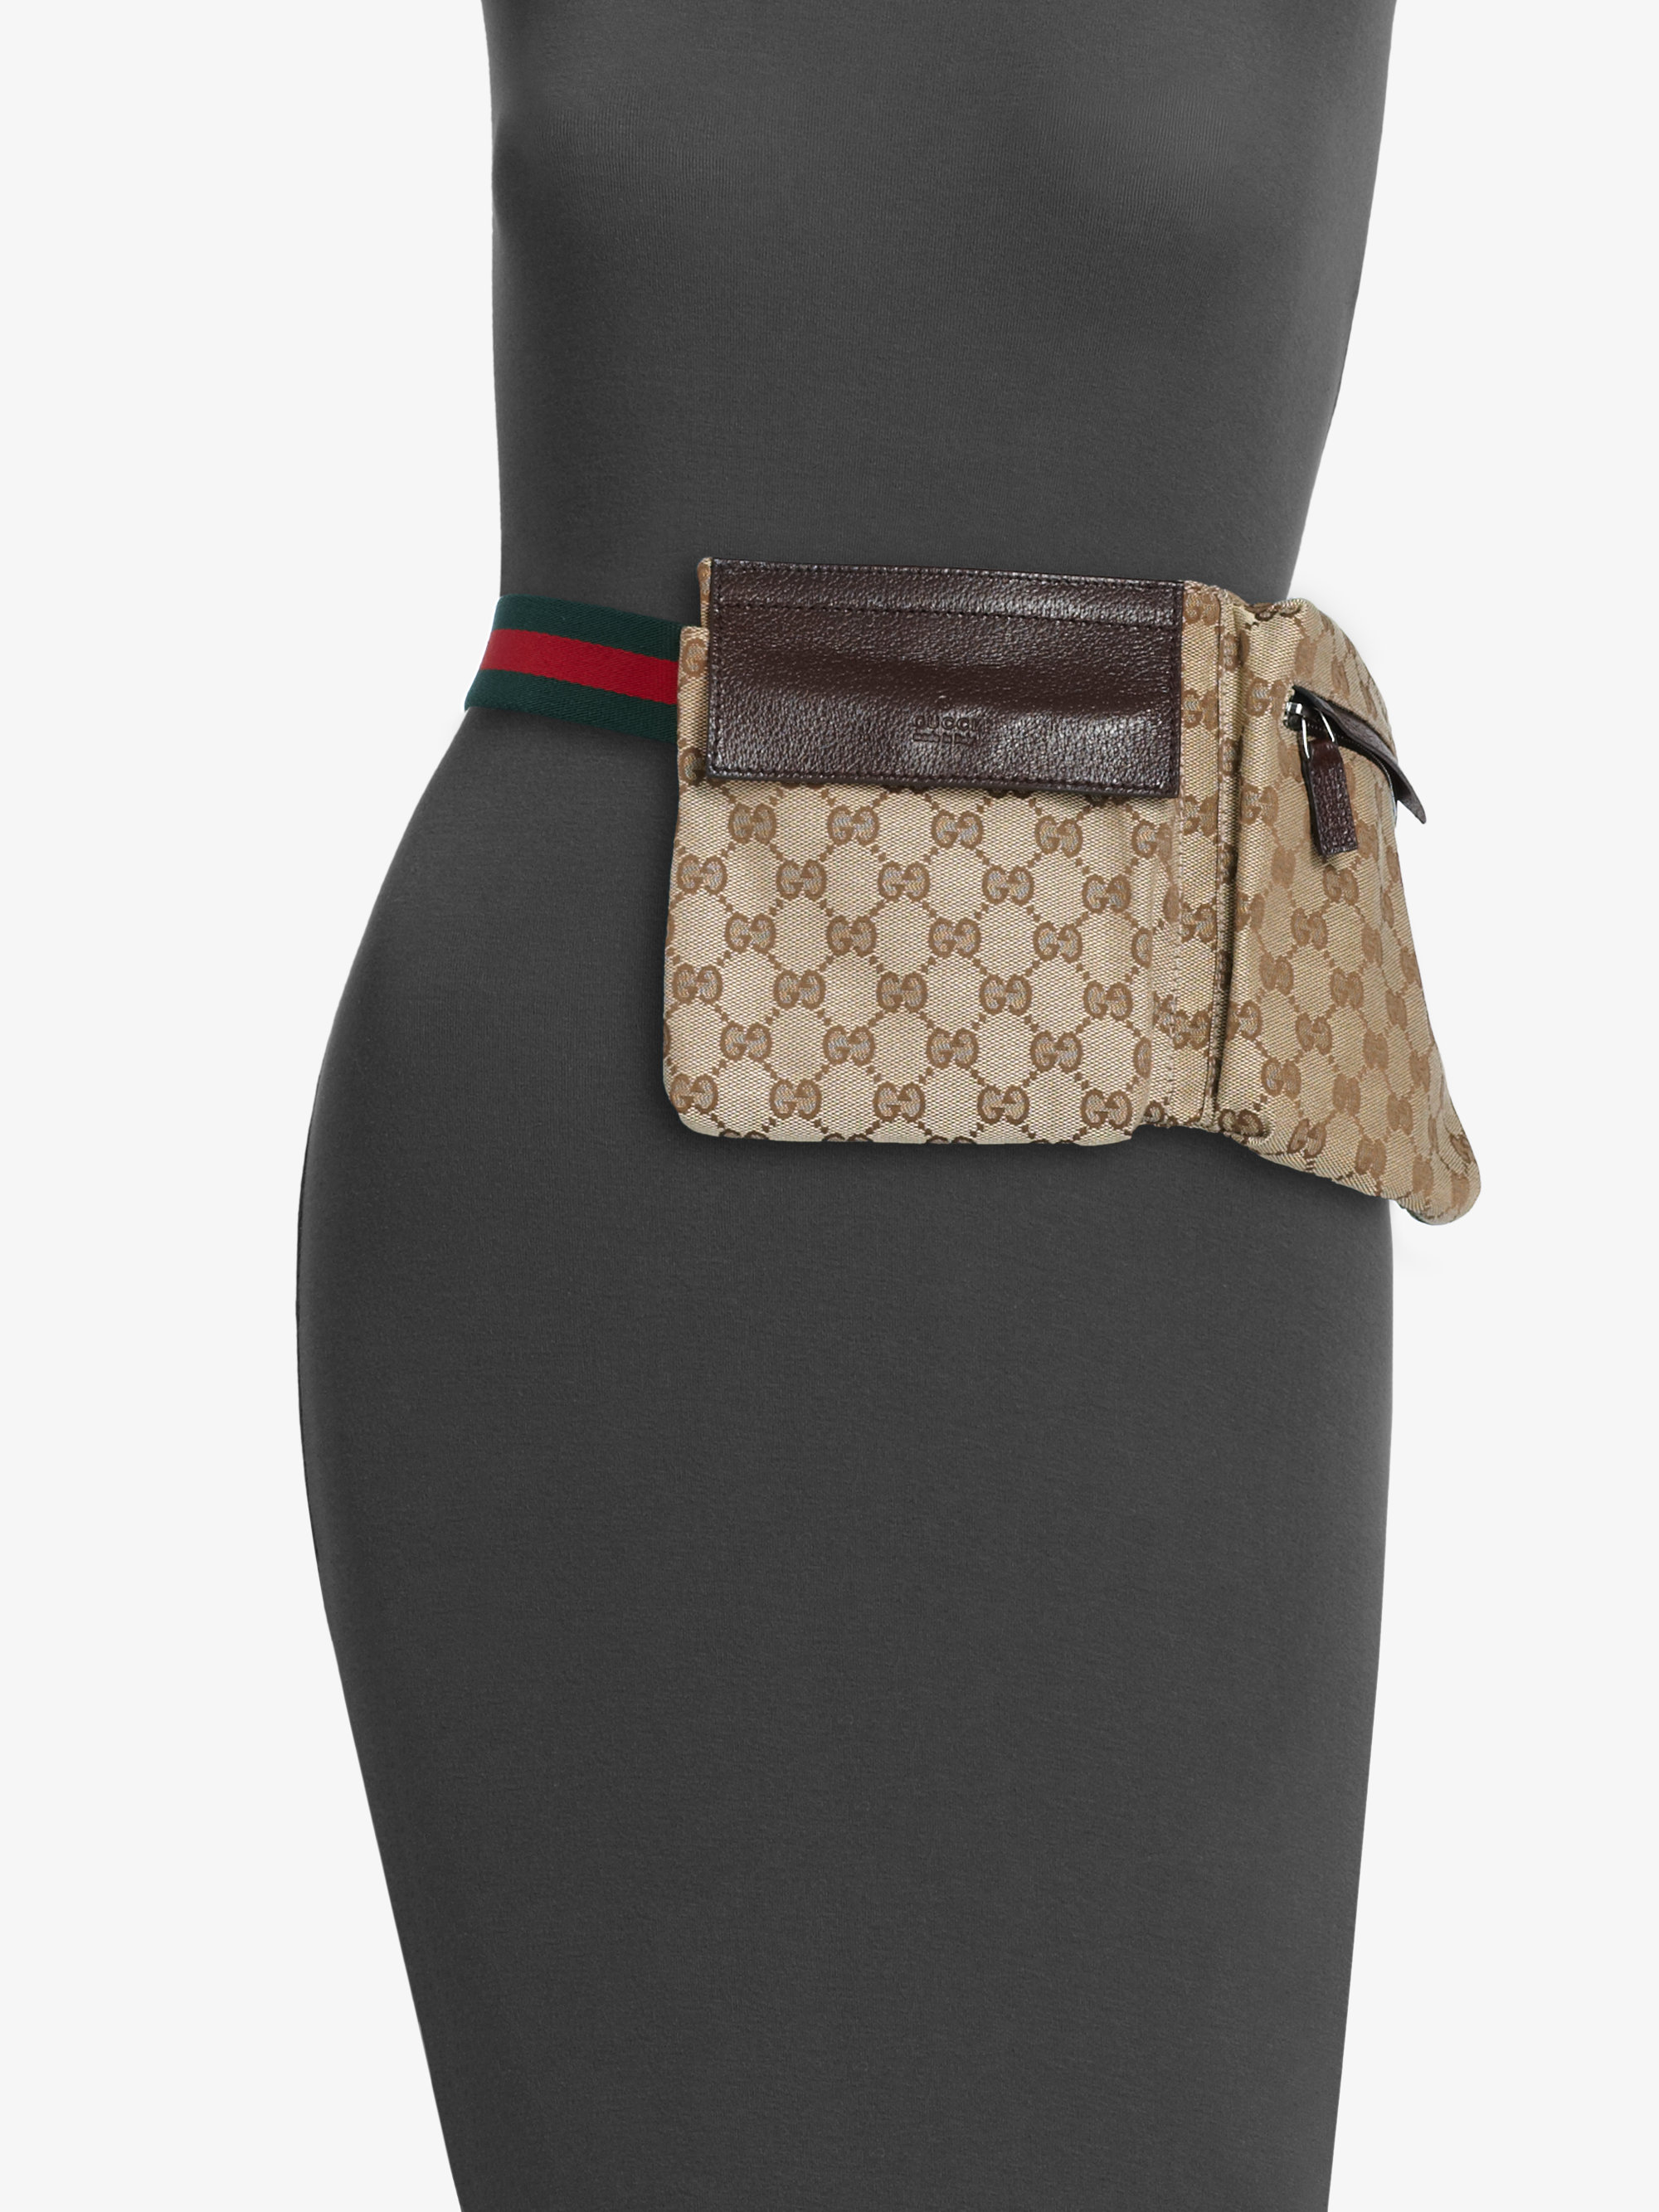 Gucci Fanny Pack Saks The Art Of Mike Mignola